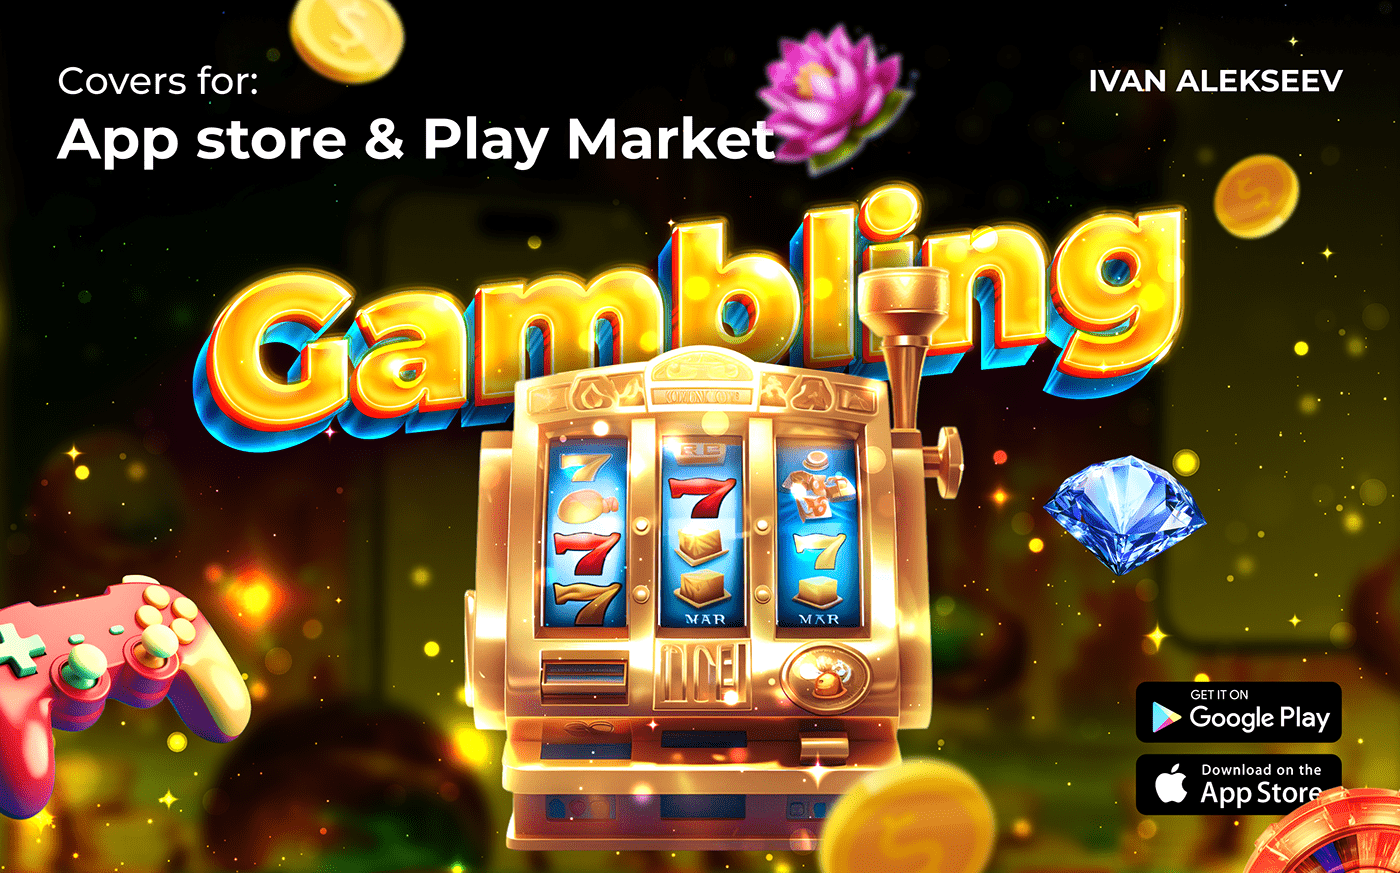 appstore android ios betting casino bet gambling game Digital Art  apps design